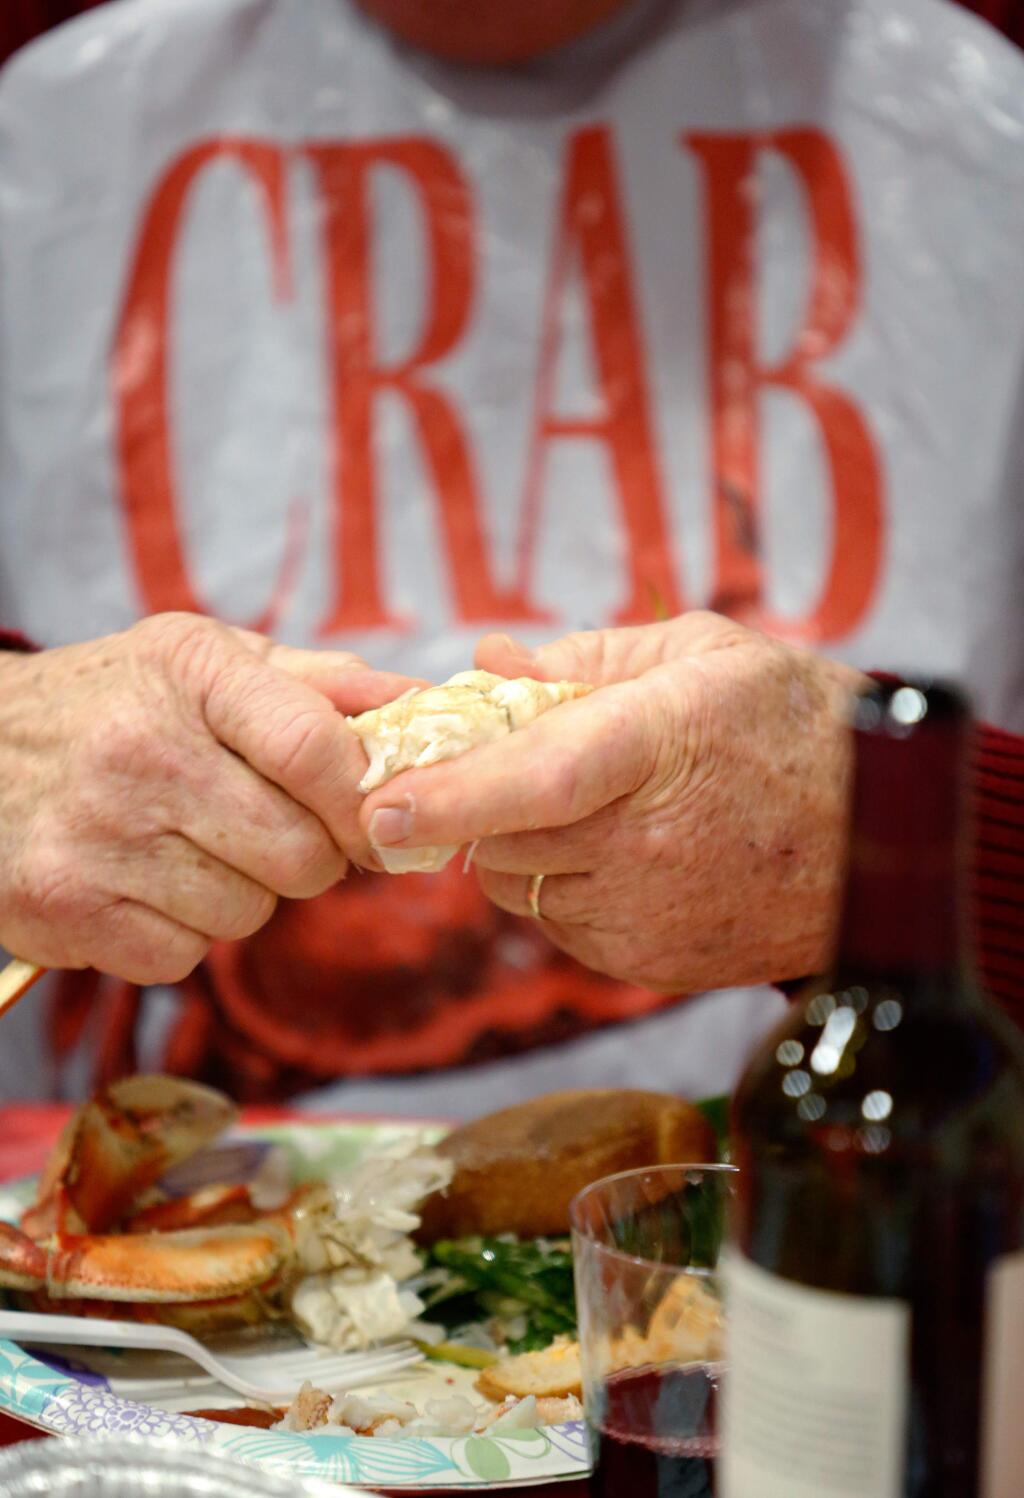 Rohnert Park Chamber of Commerce member Gary Tatman enjoys some fresh-cooked, hot crab that was caught in Oregon, during the Rohnert Park Chamber of Commerce Crab Feed in Rohnert Park, California on Saturday, January 9, 2016. (Alvin Jornada / The Press Democrat)